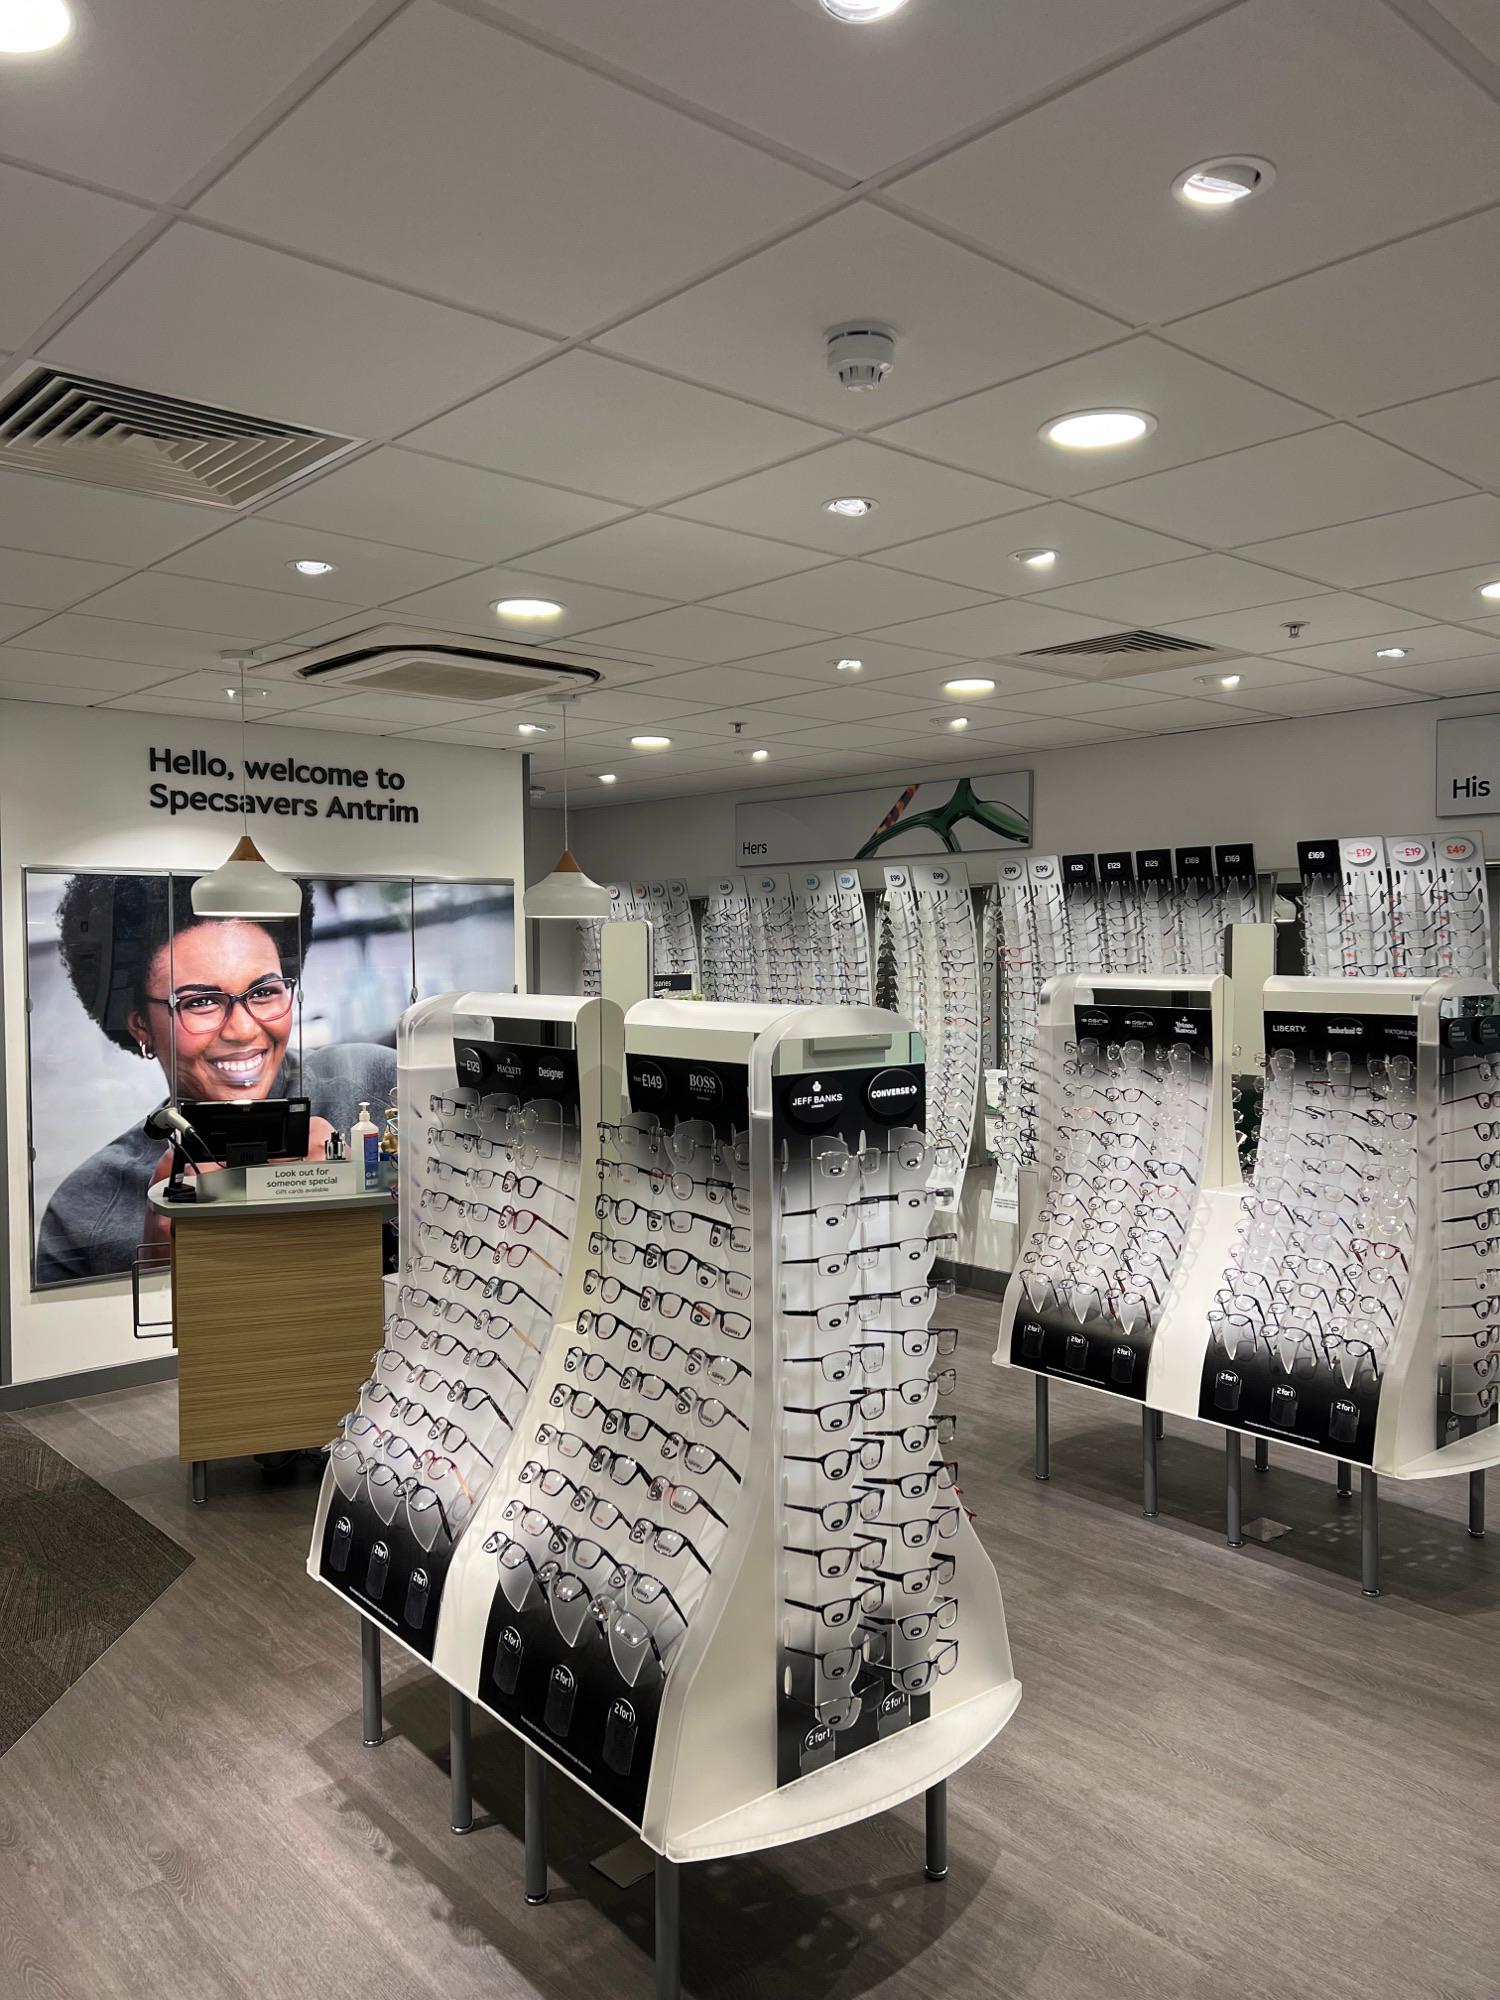 Images Specsavers Opticians and Audiologists - Antrim